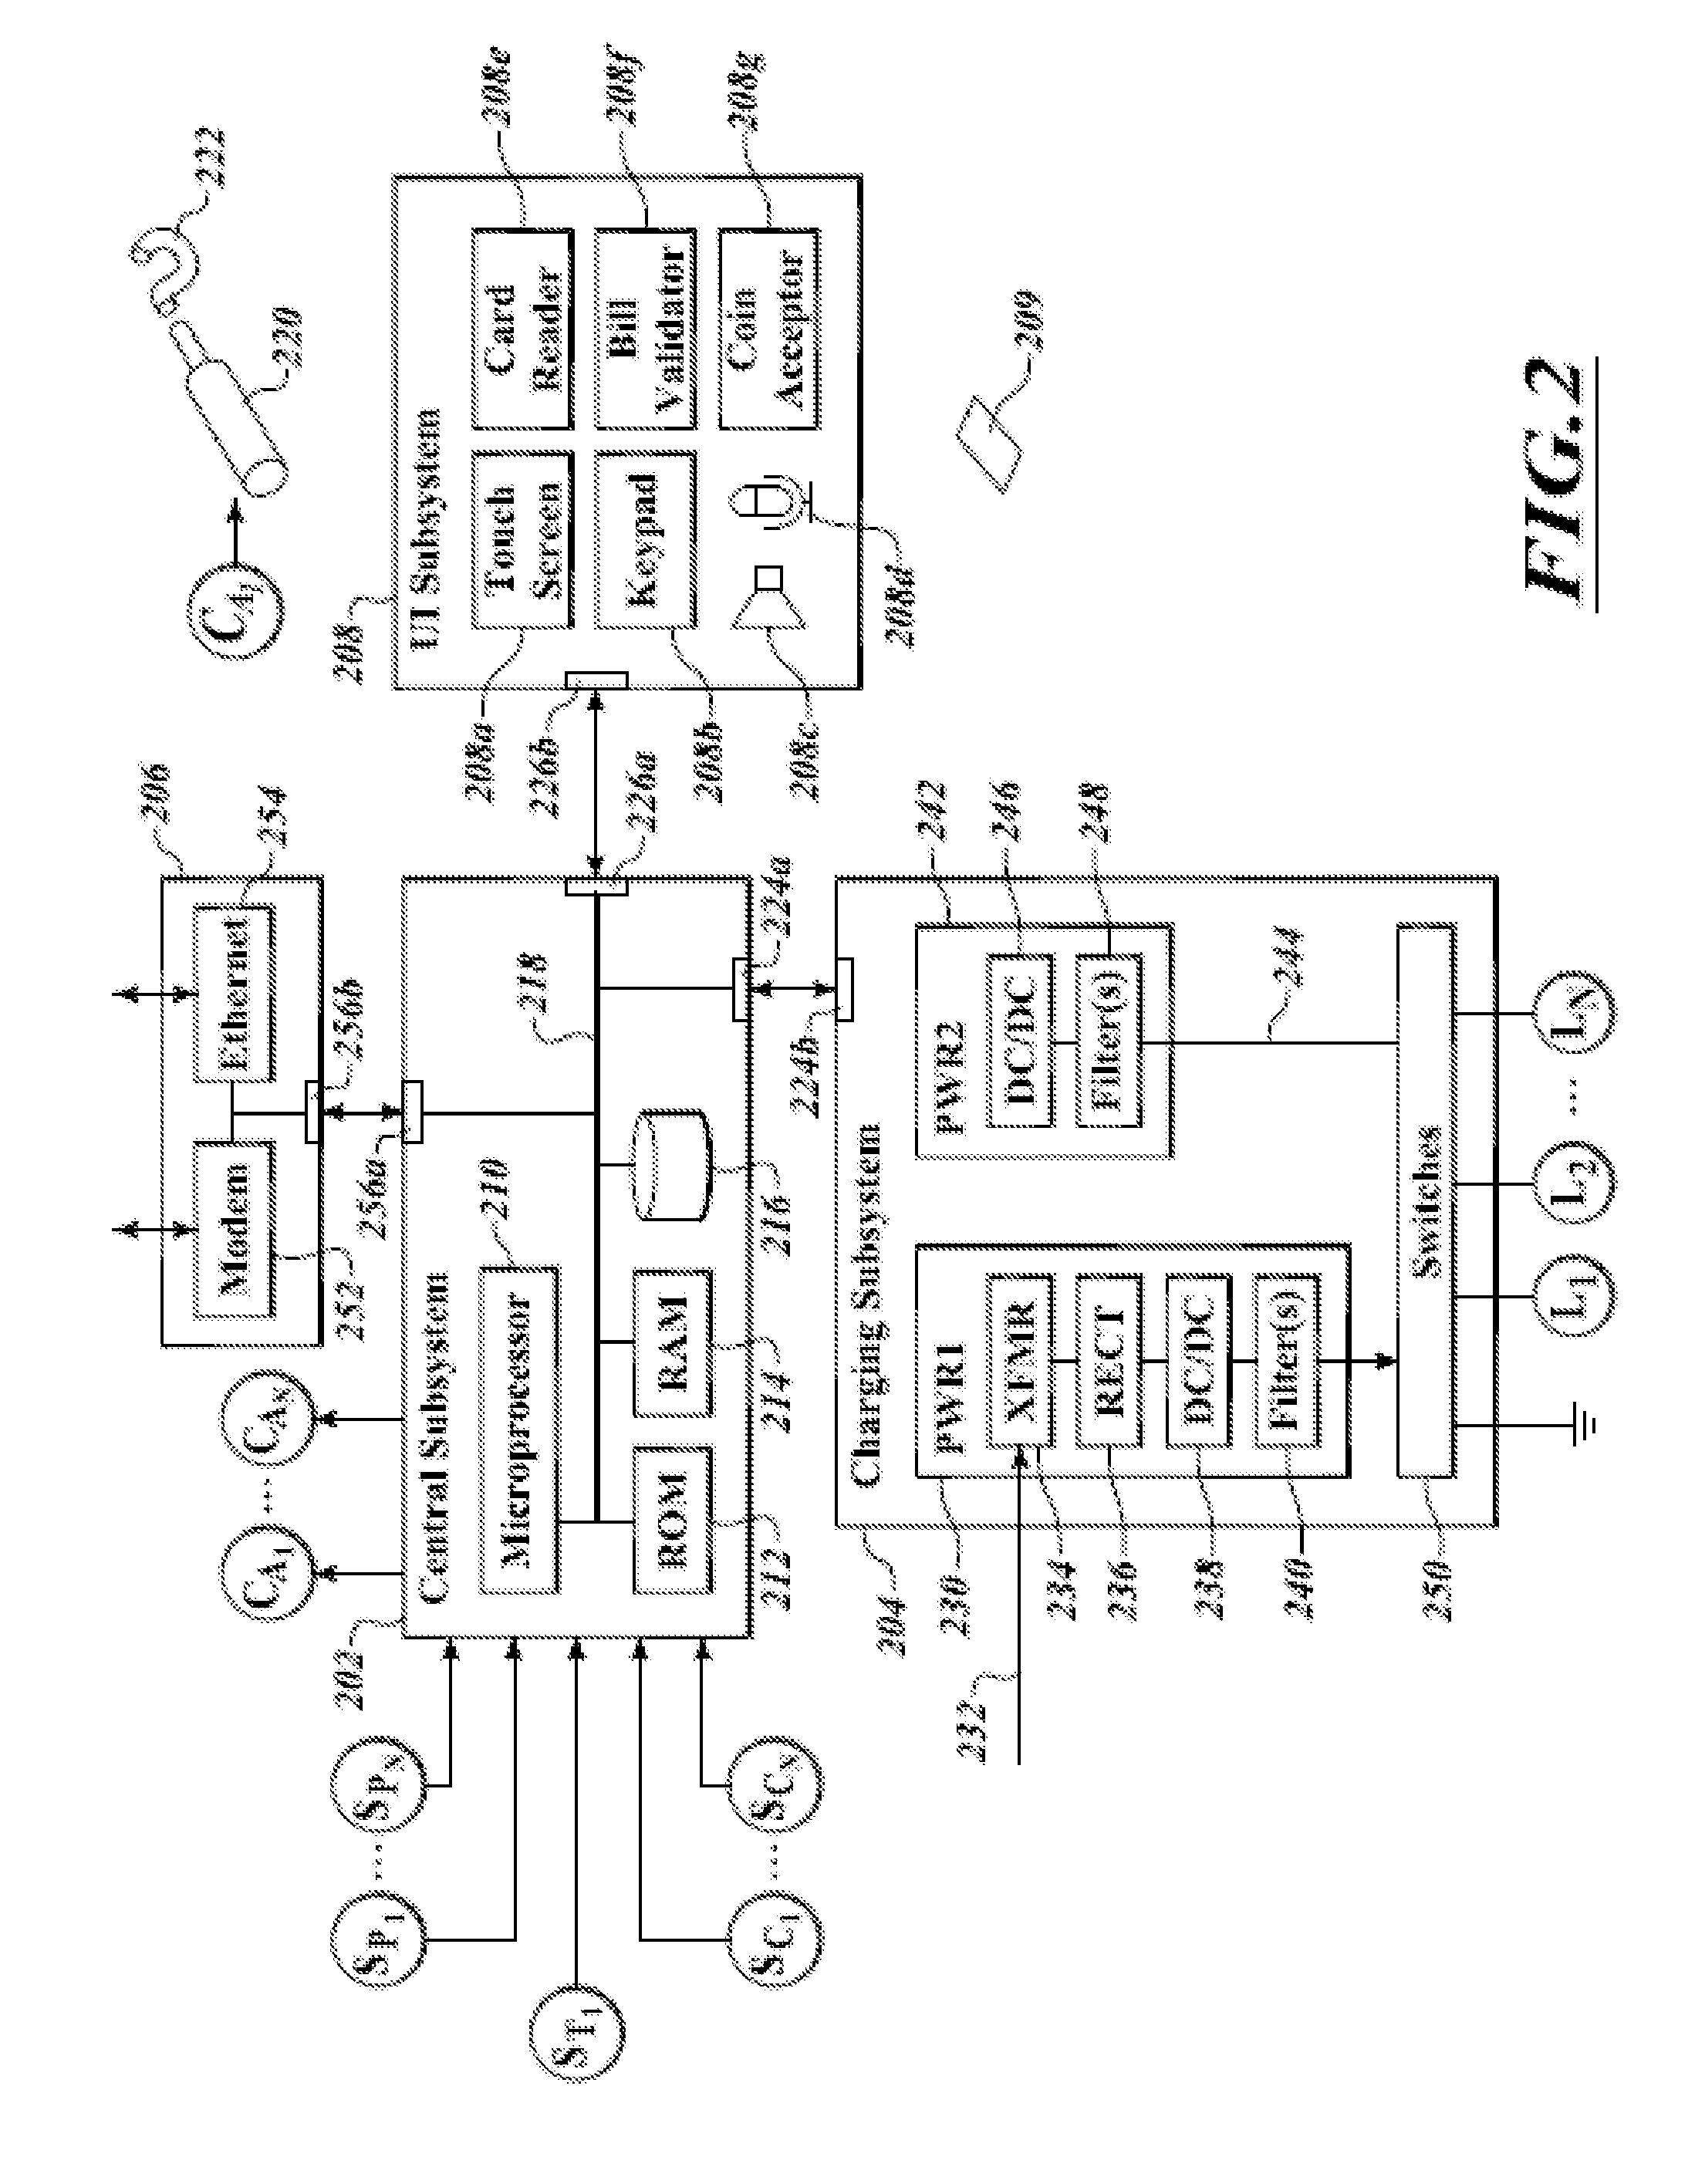 Apparatus, method and article for authentication, security and control of power storage devices, such as batteries